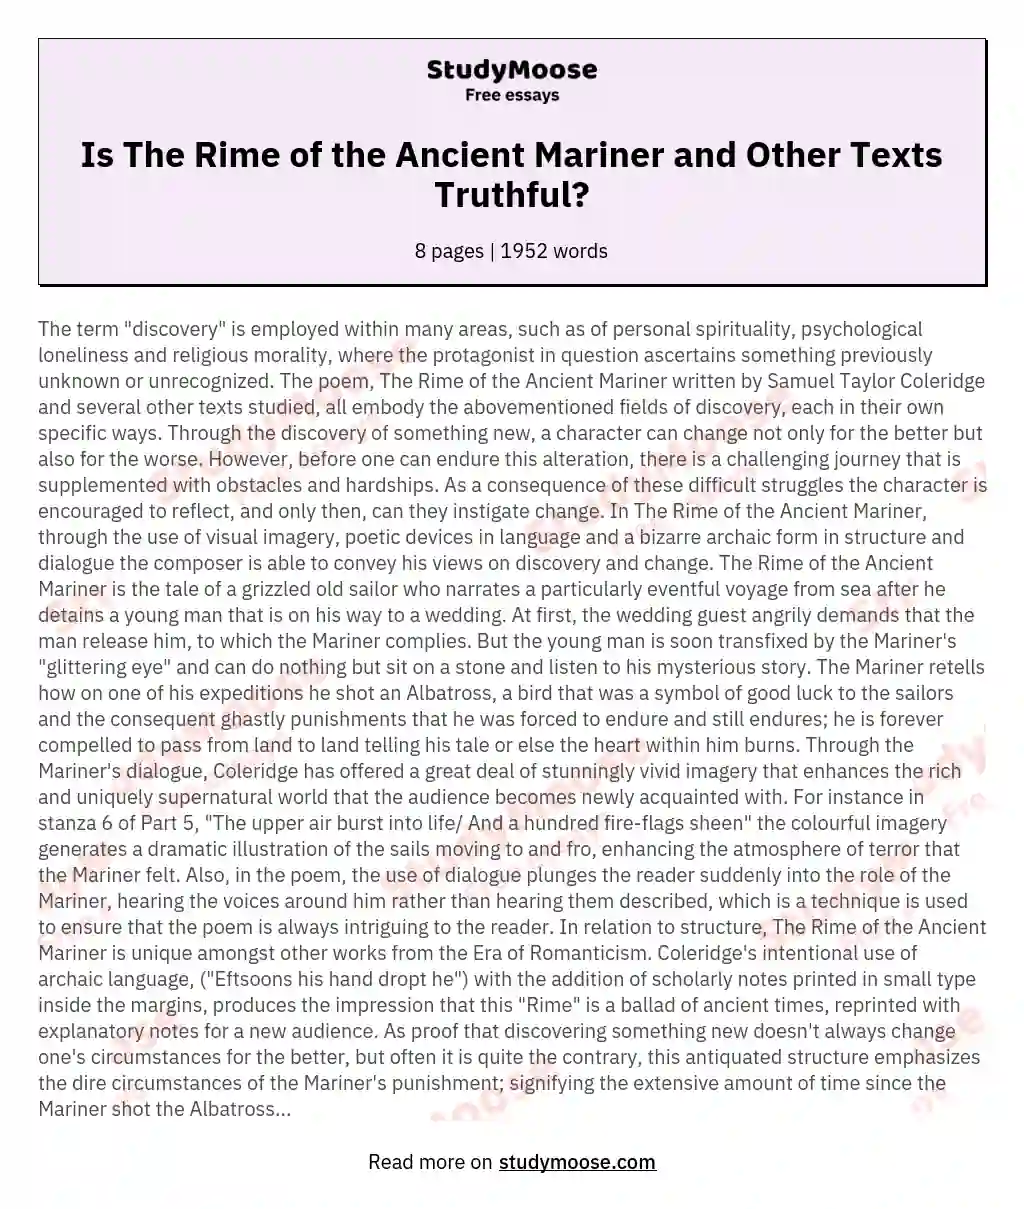 Is this true of "The Rime of the Ancient Mariner" and other texts you have studied?